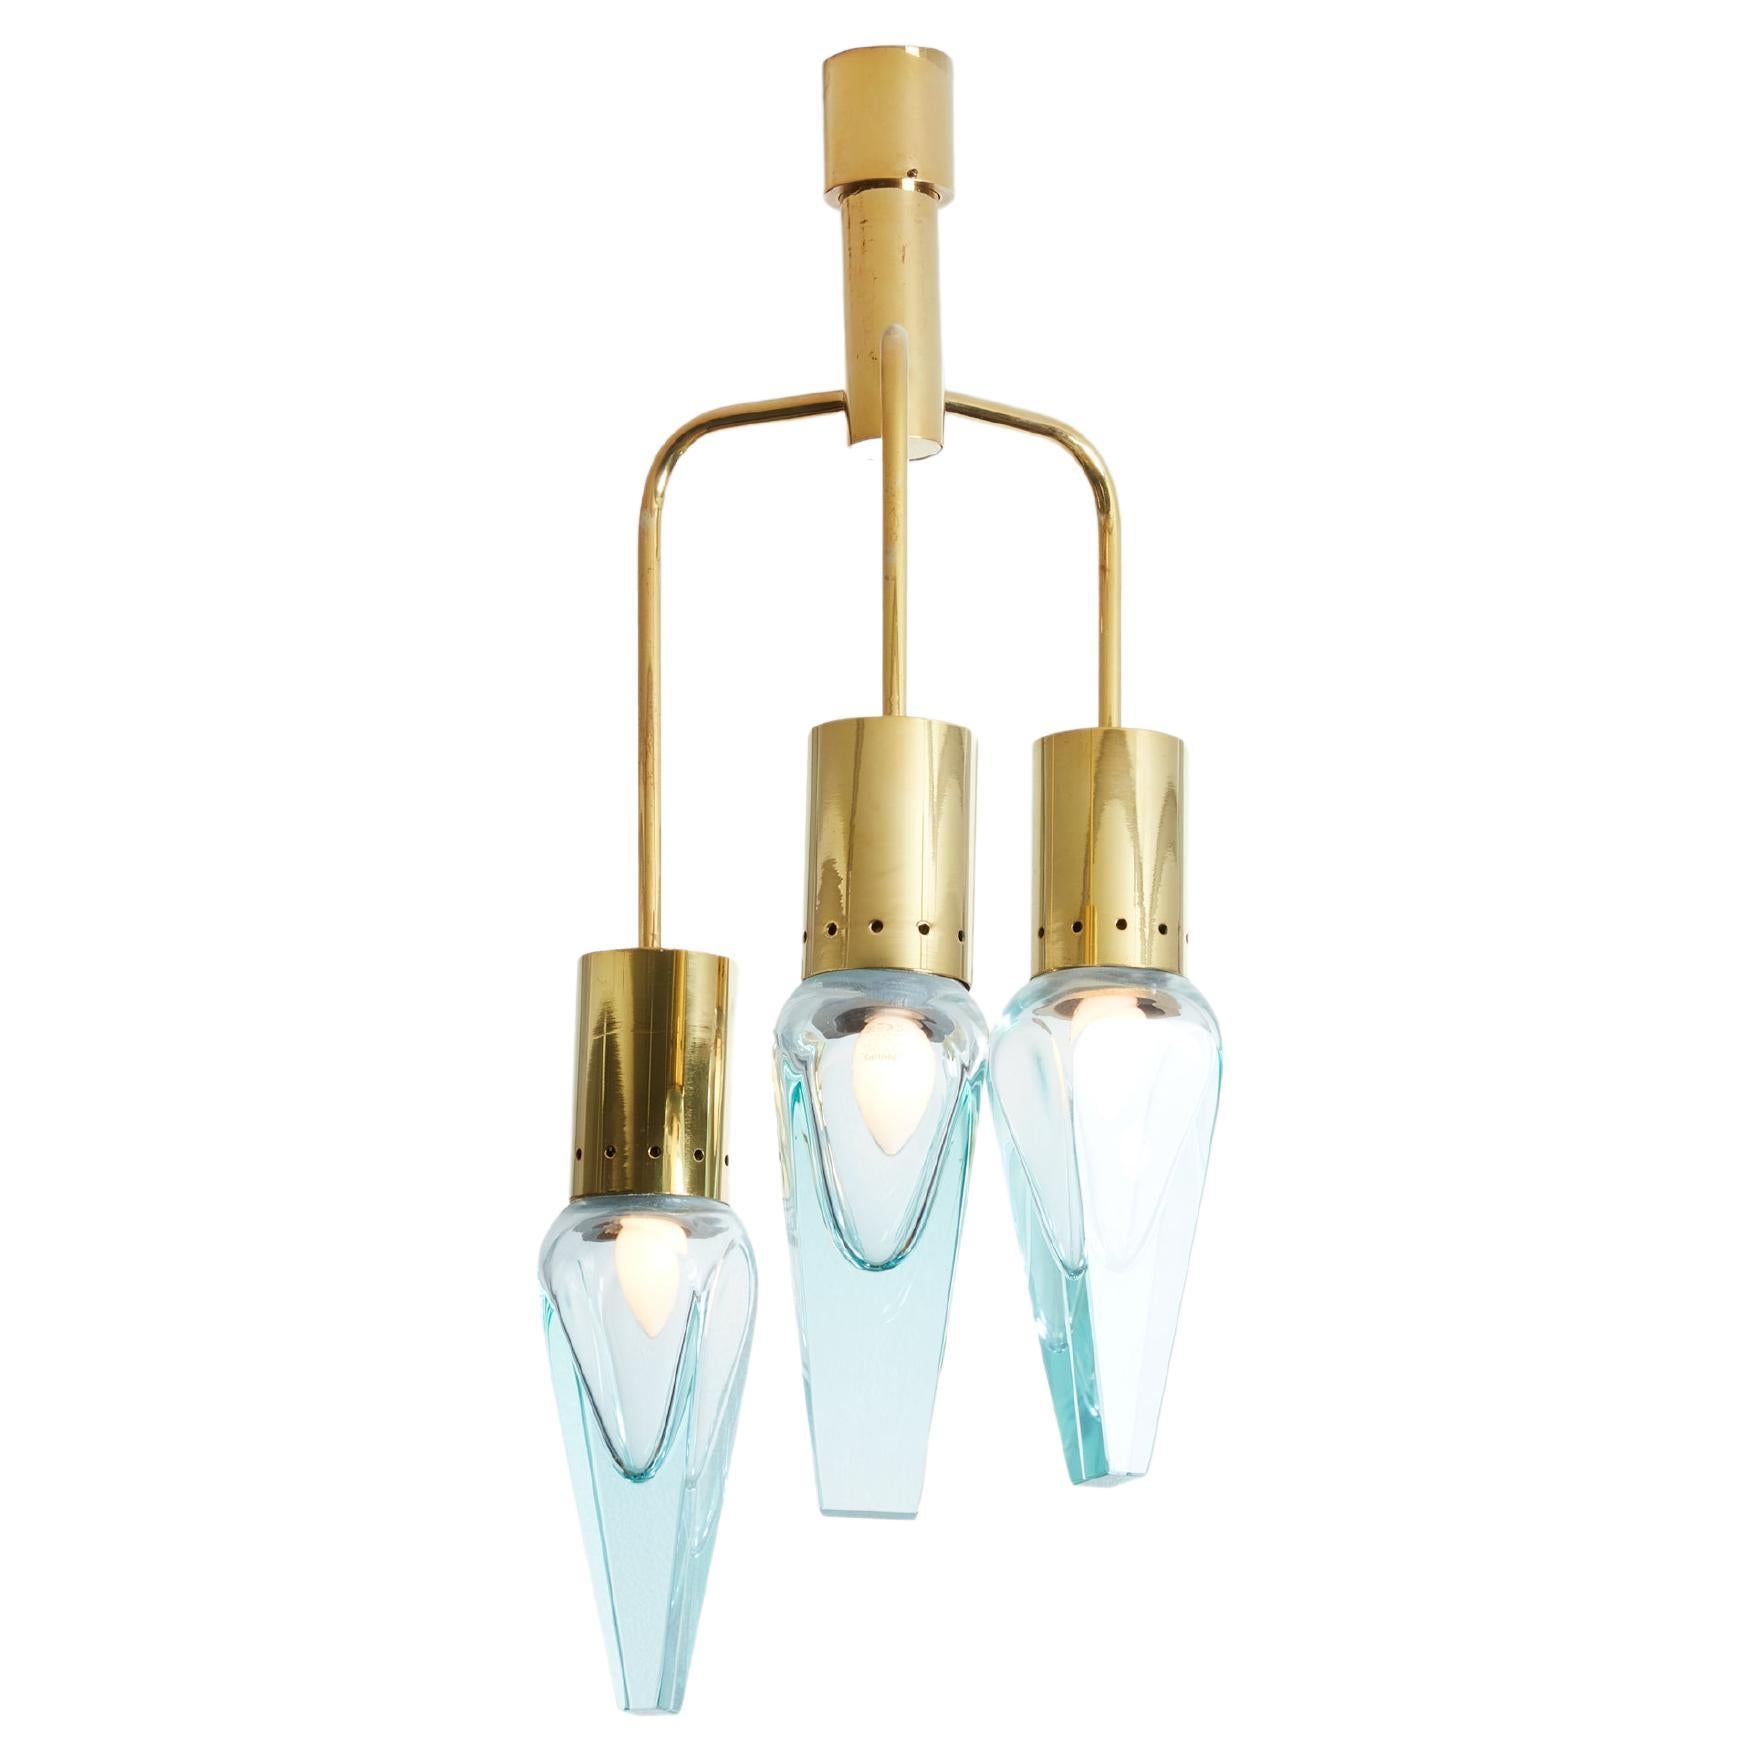 Flavio Poli for Seguso thick Murano glass and brass chandelier 1950s  For Sale